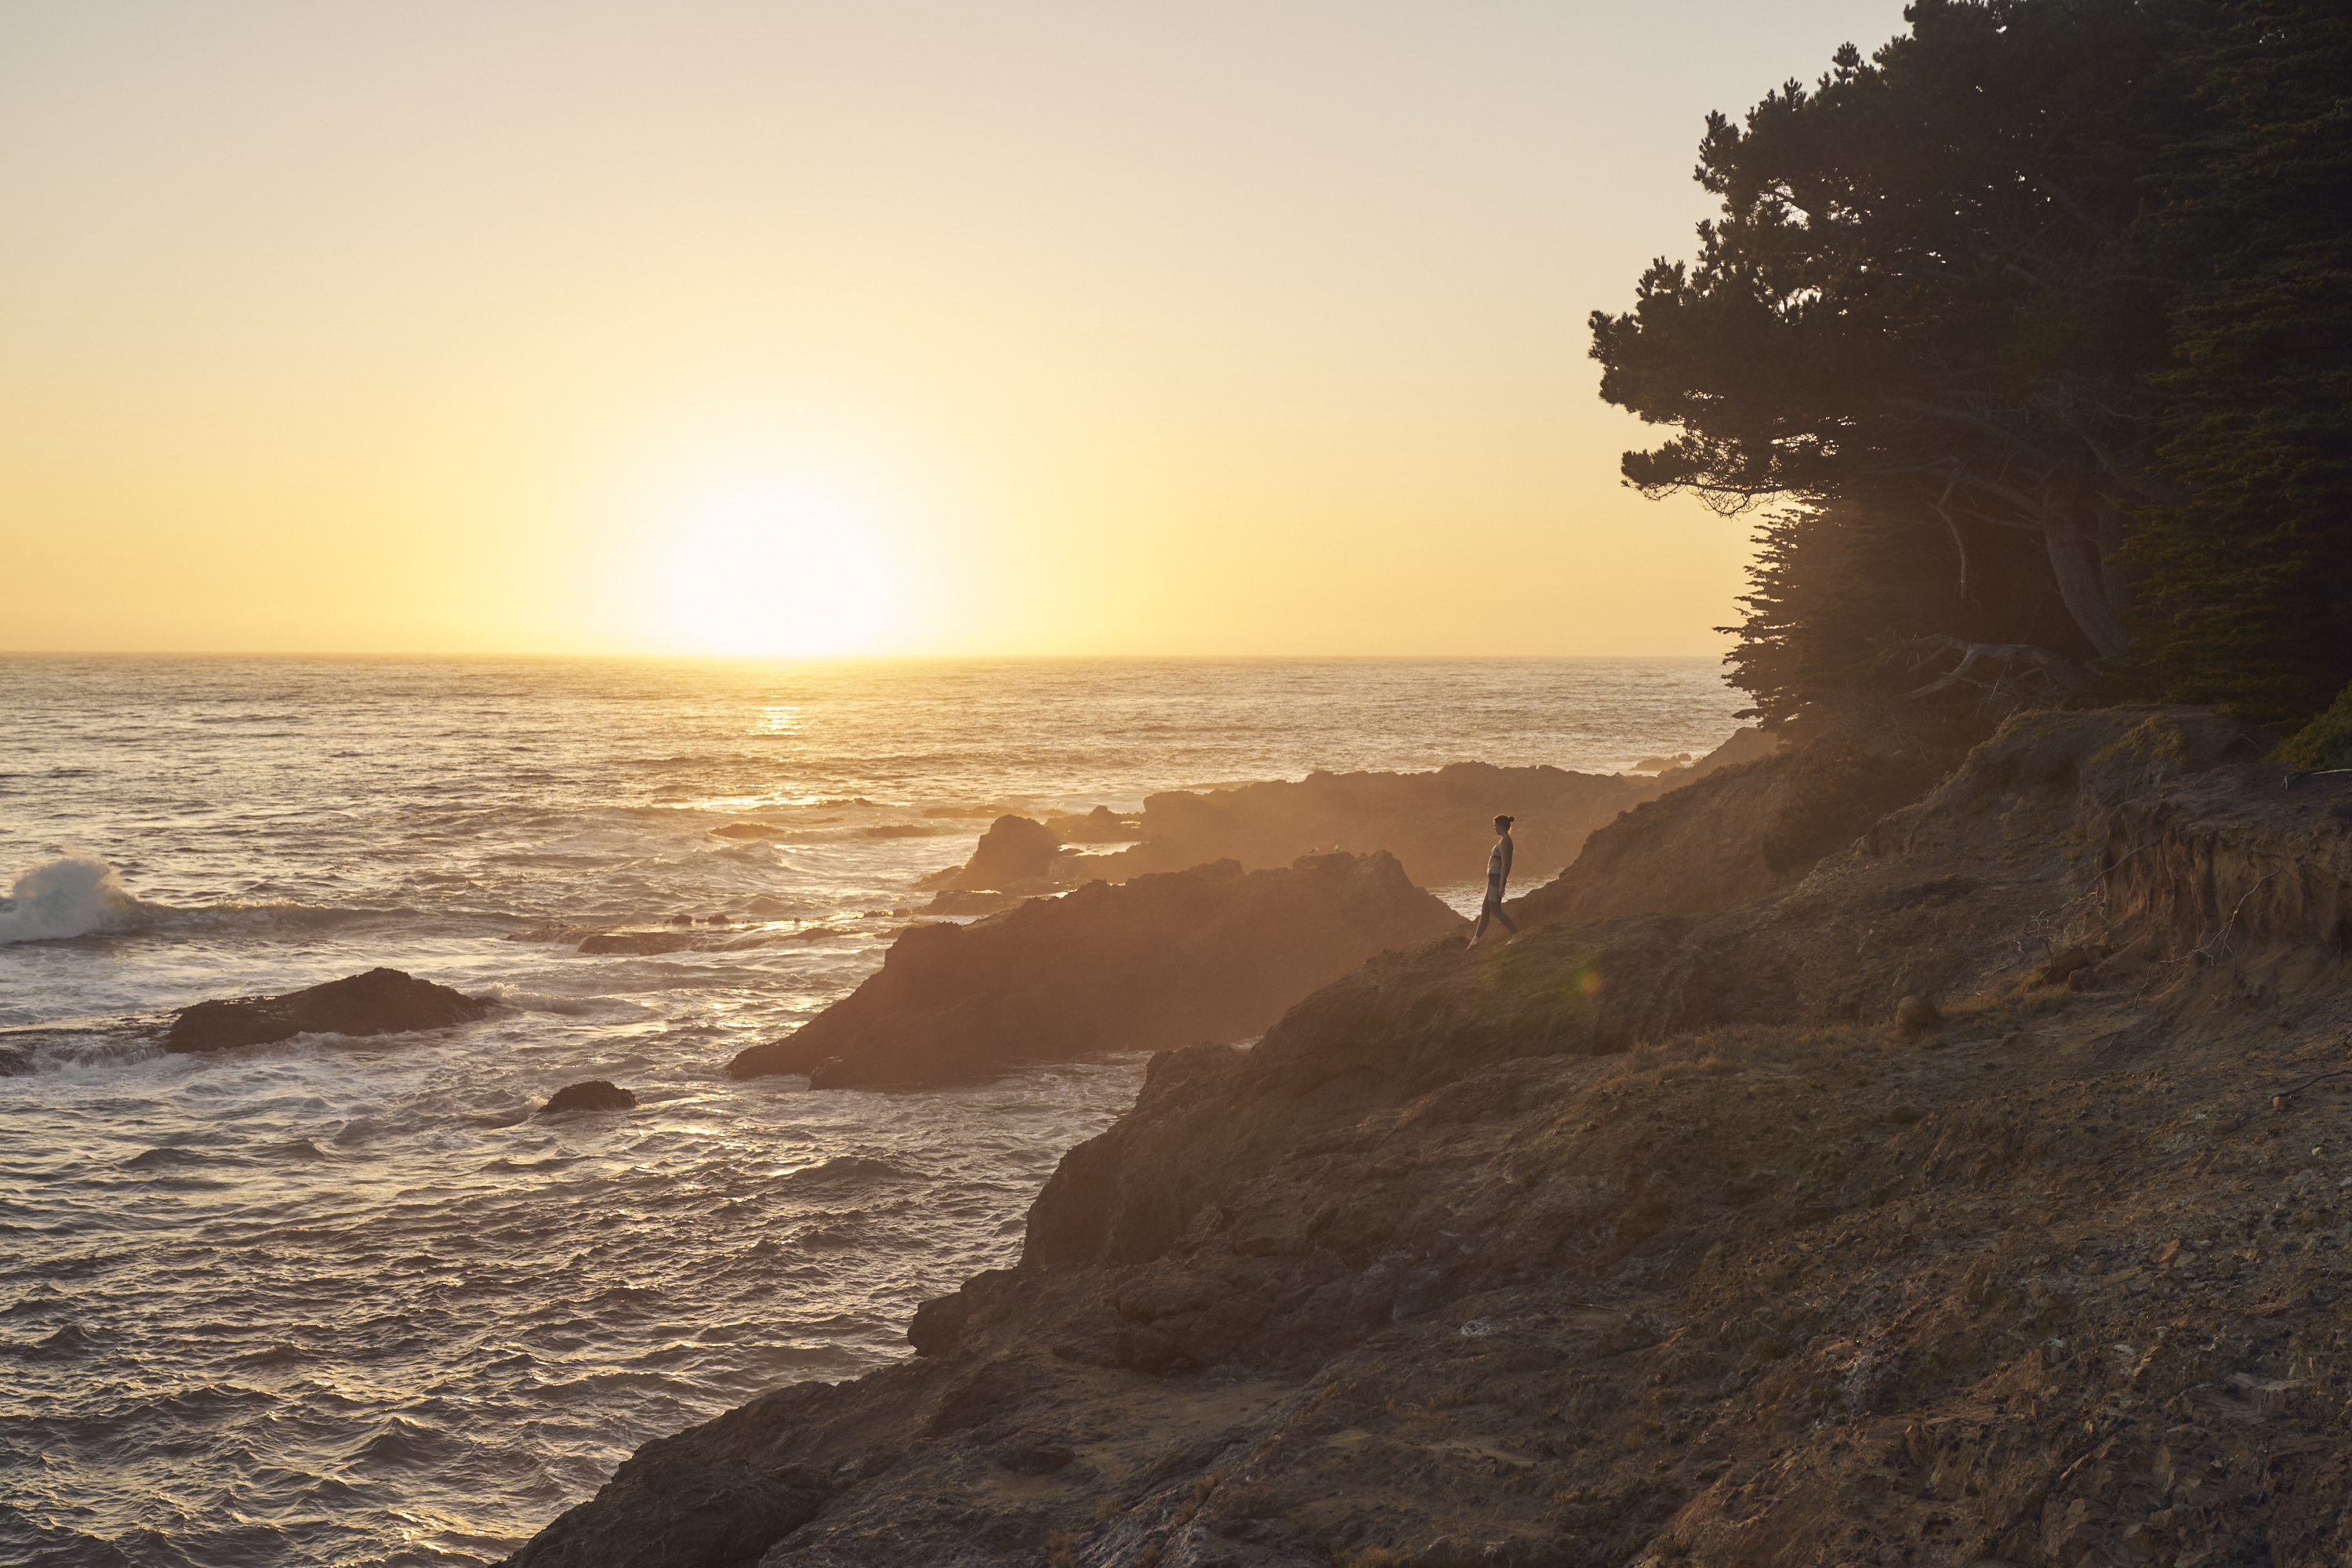 A lone person stands on a rocky cliff overlooking a vast, shimmering ocean at sunset, with waves crashing against the rugged shoreline and trees framing the scene.